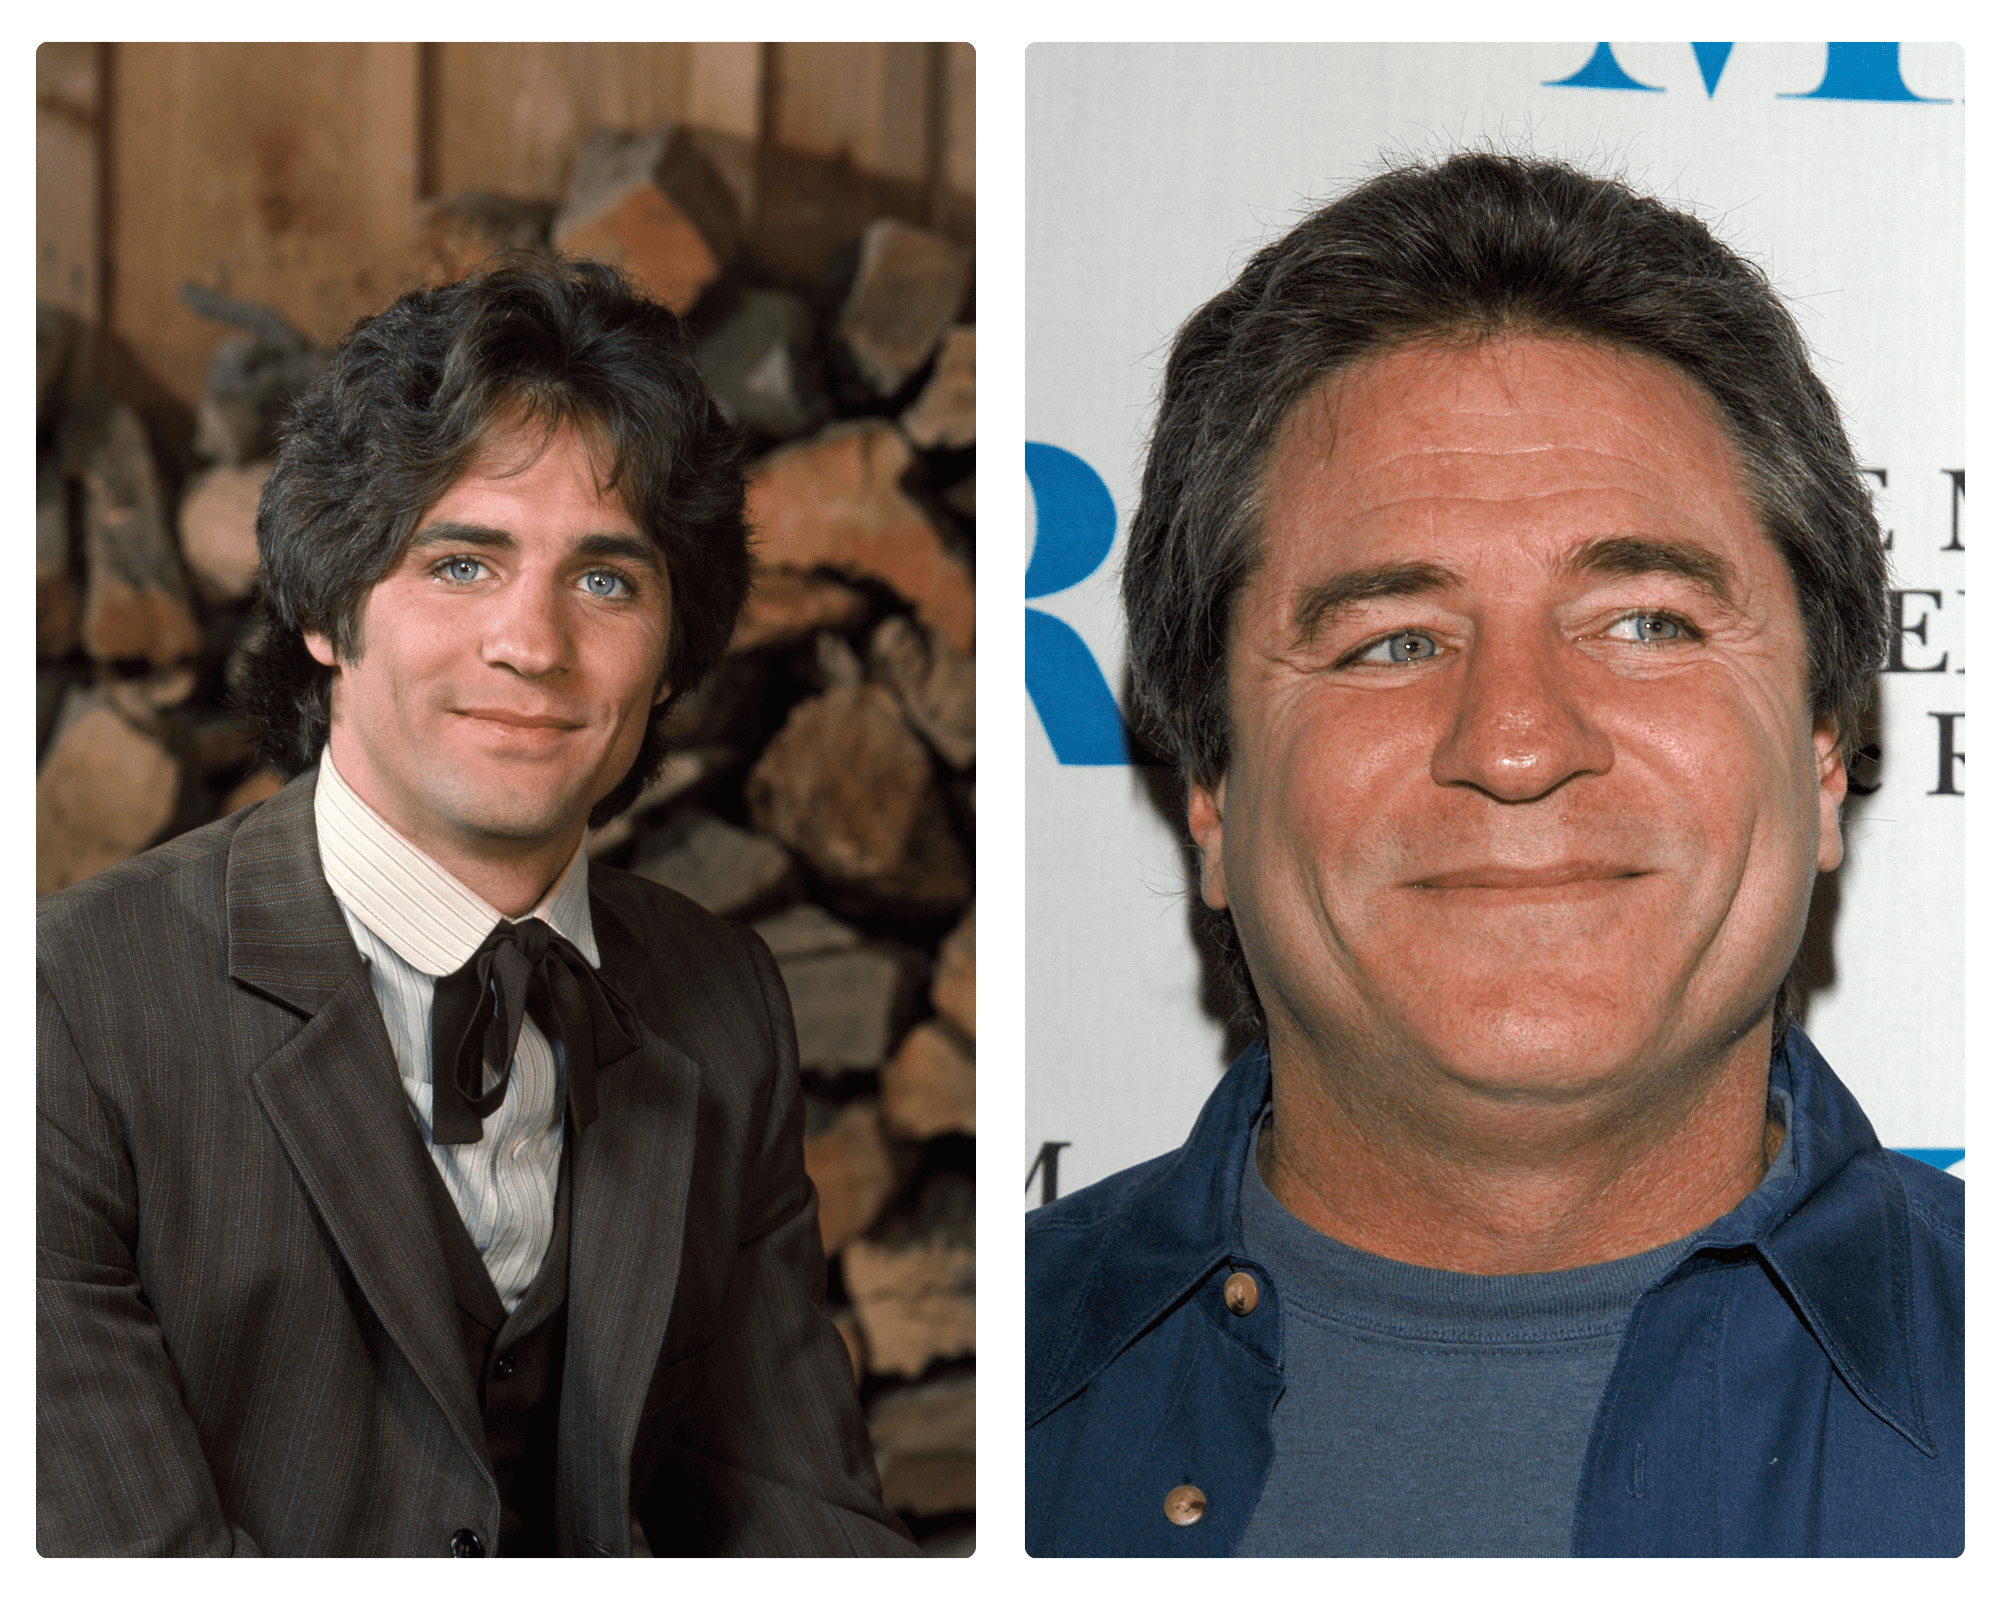 Linwood Boomer | Source: Getty Images